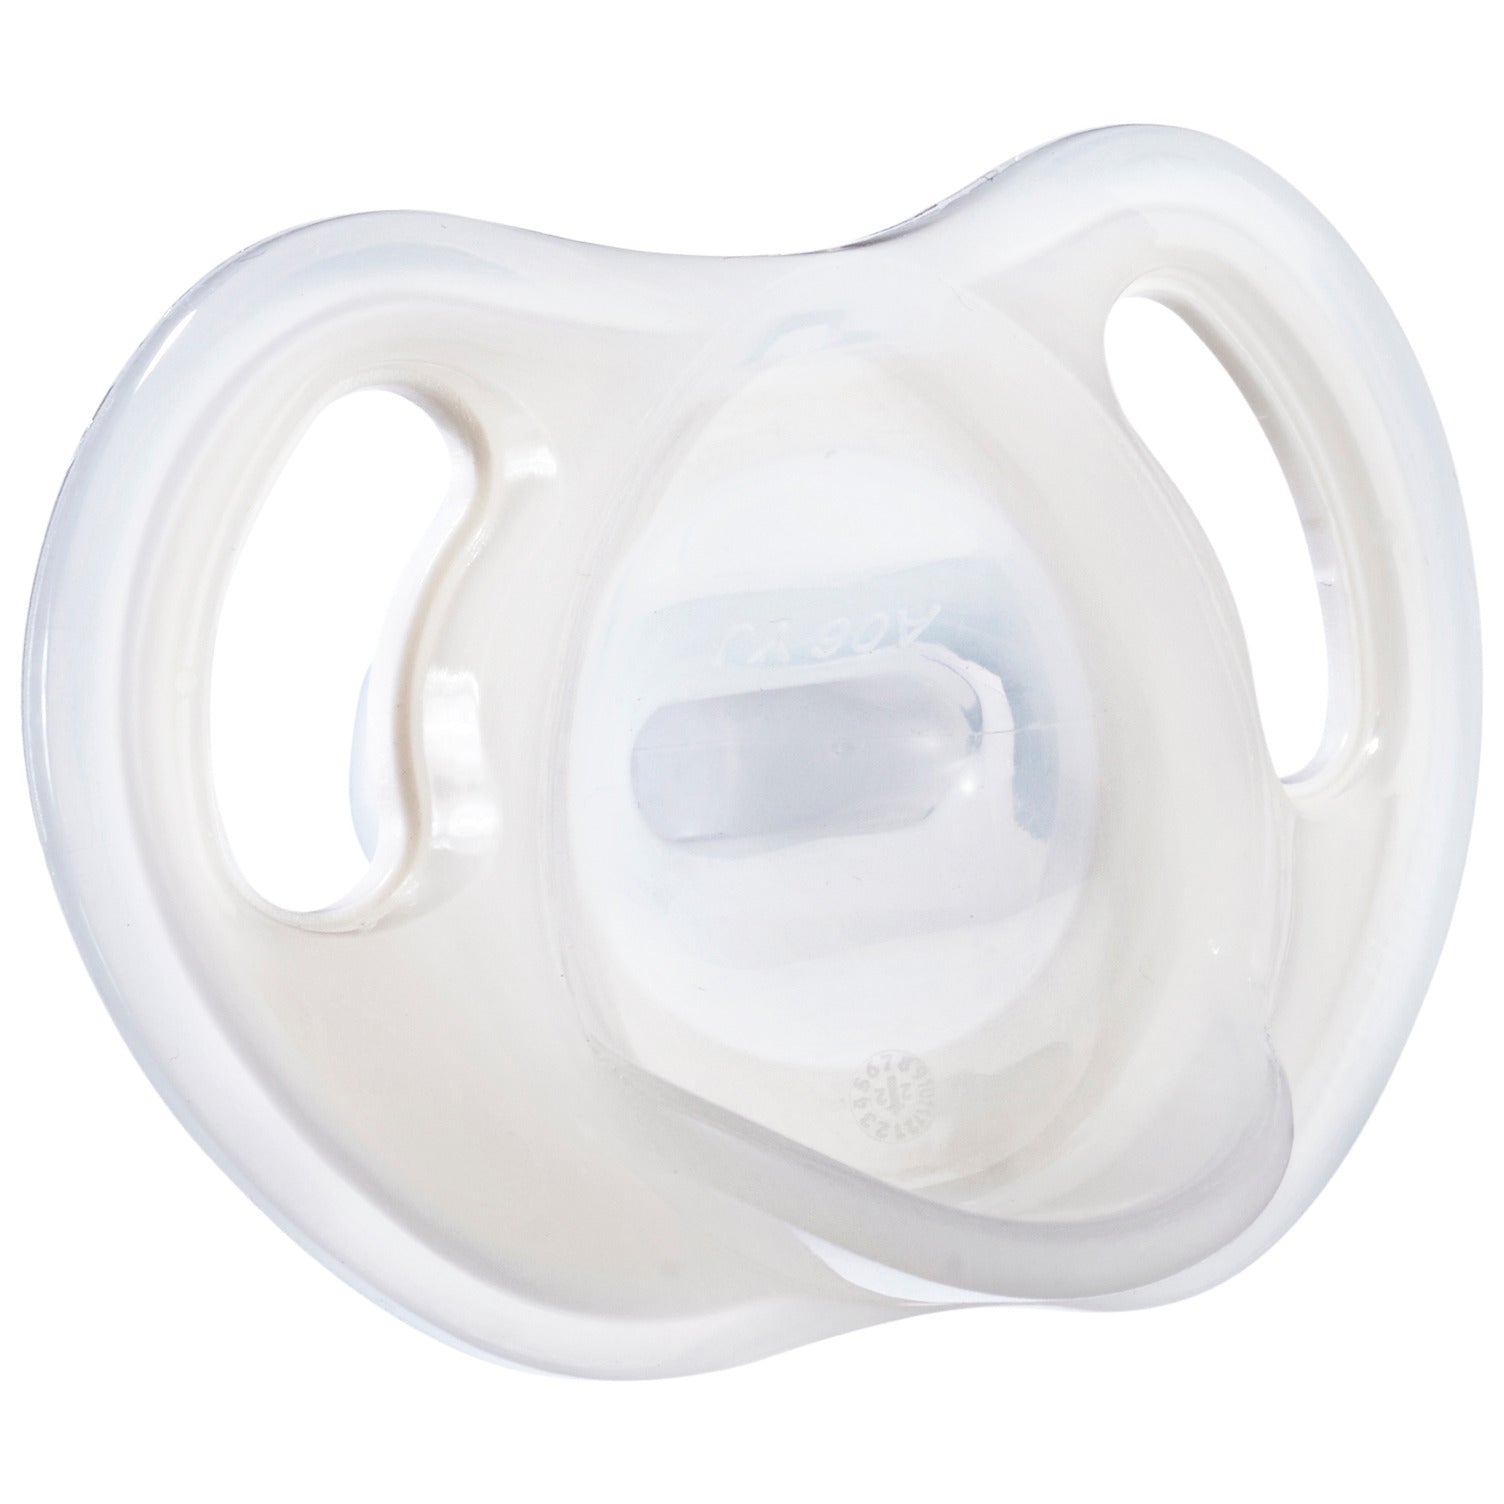 Tommee Tippee Closer to Nature Ultralight Soothers 0-6m (Pack of 2)